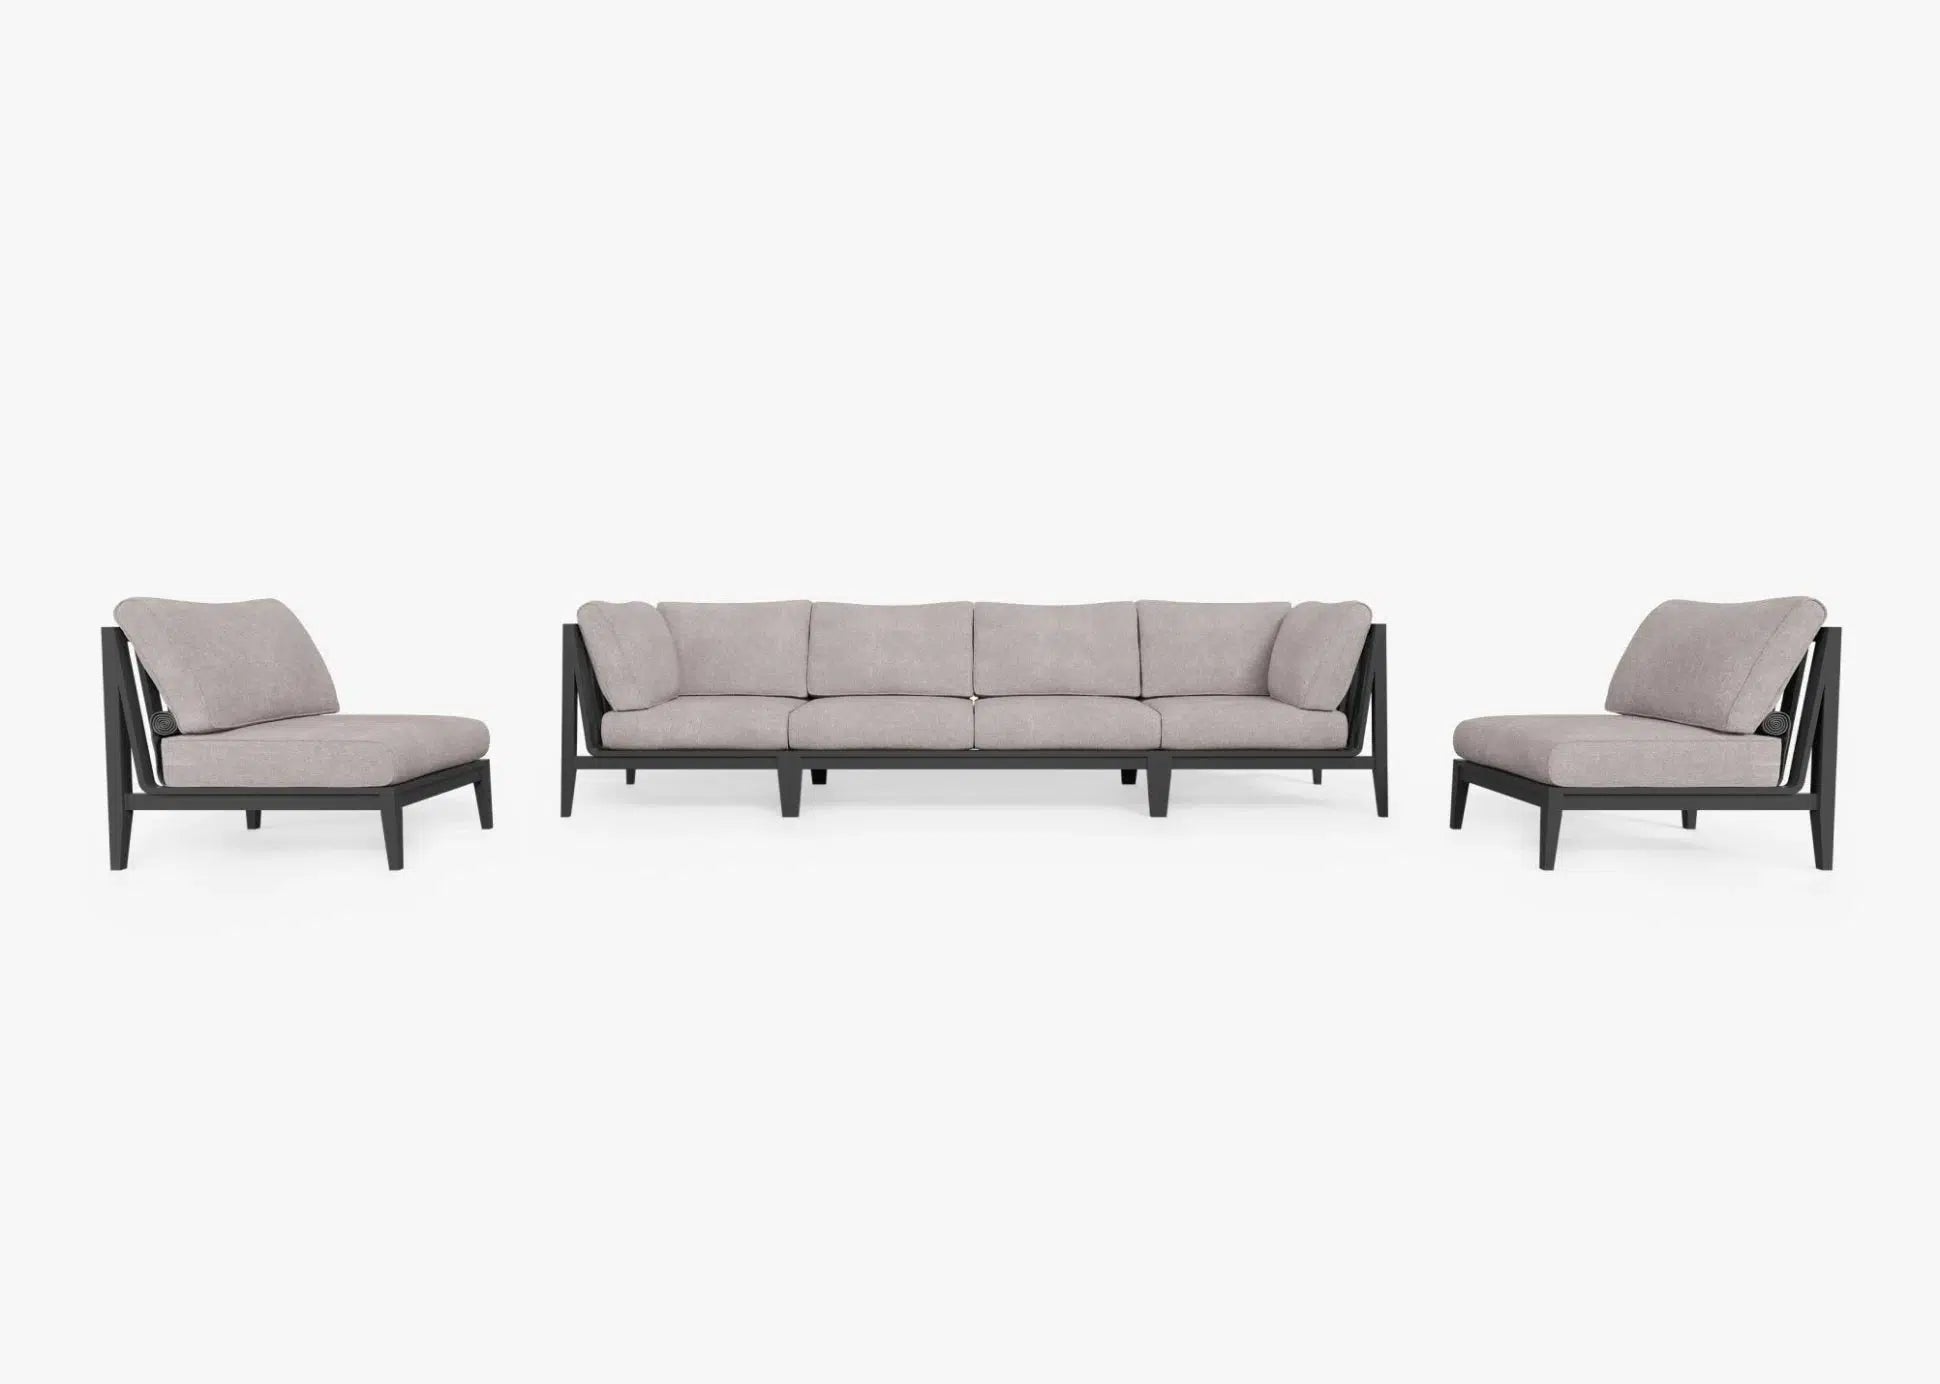 Live Outer 127" Charcoal Aluminum Outdoor Sofa With Armless Chairs and Sandstone Gray Cushion (6-Seat)